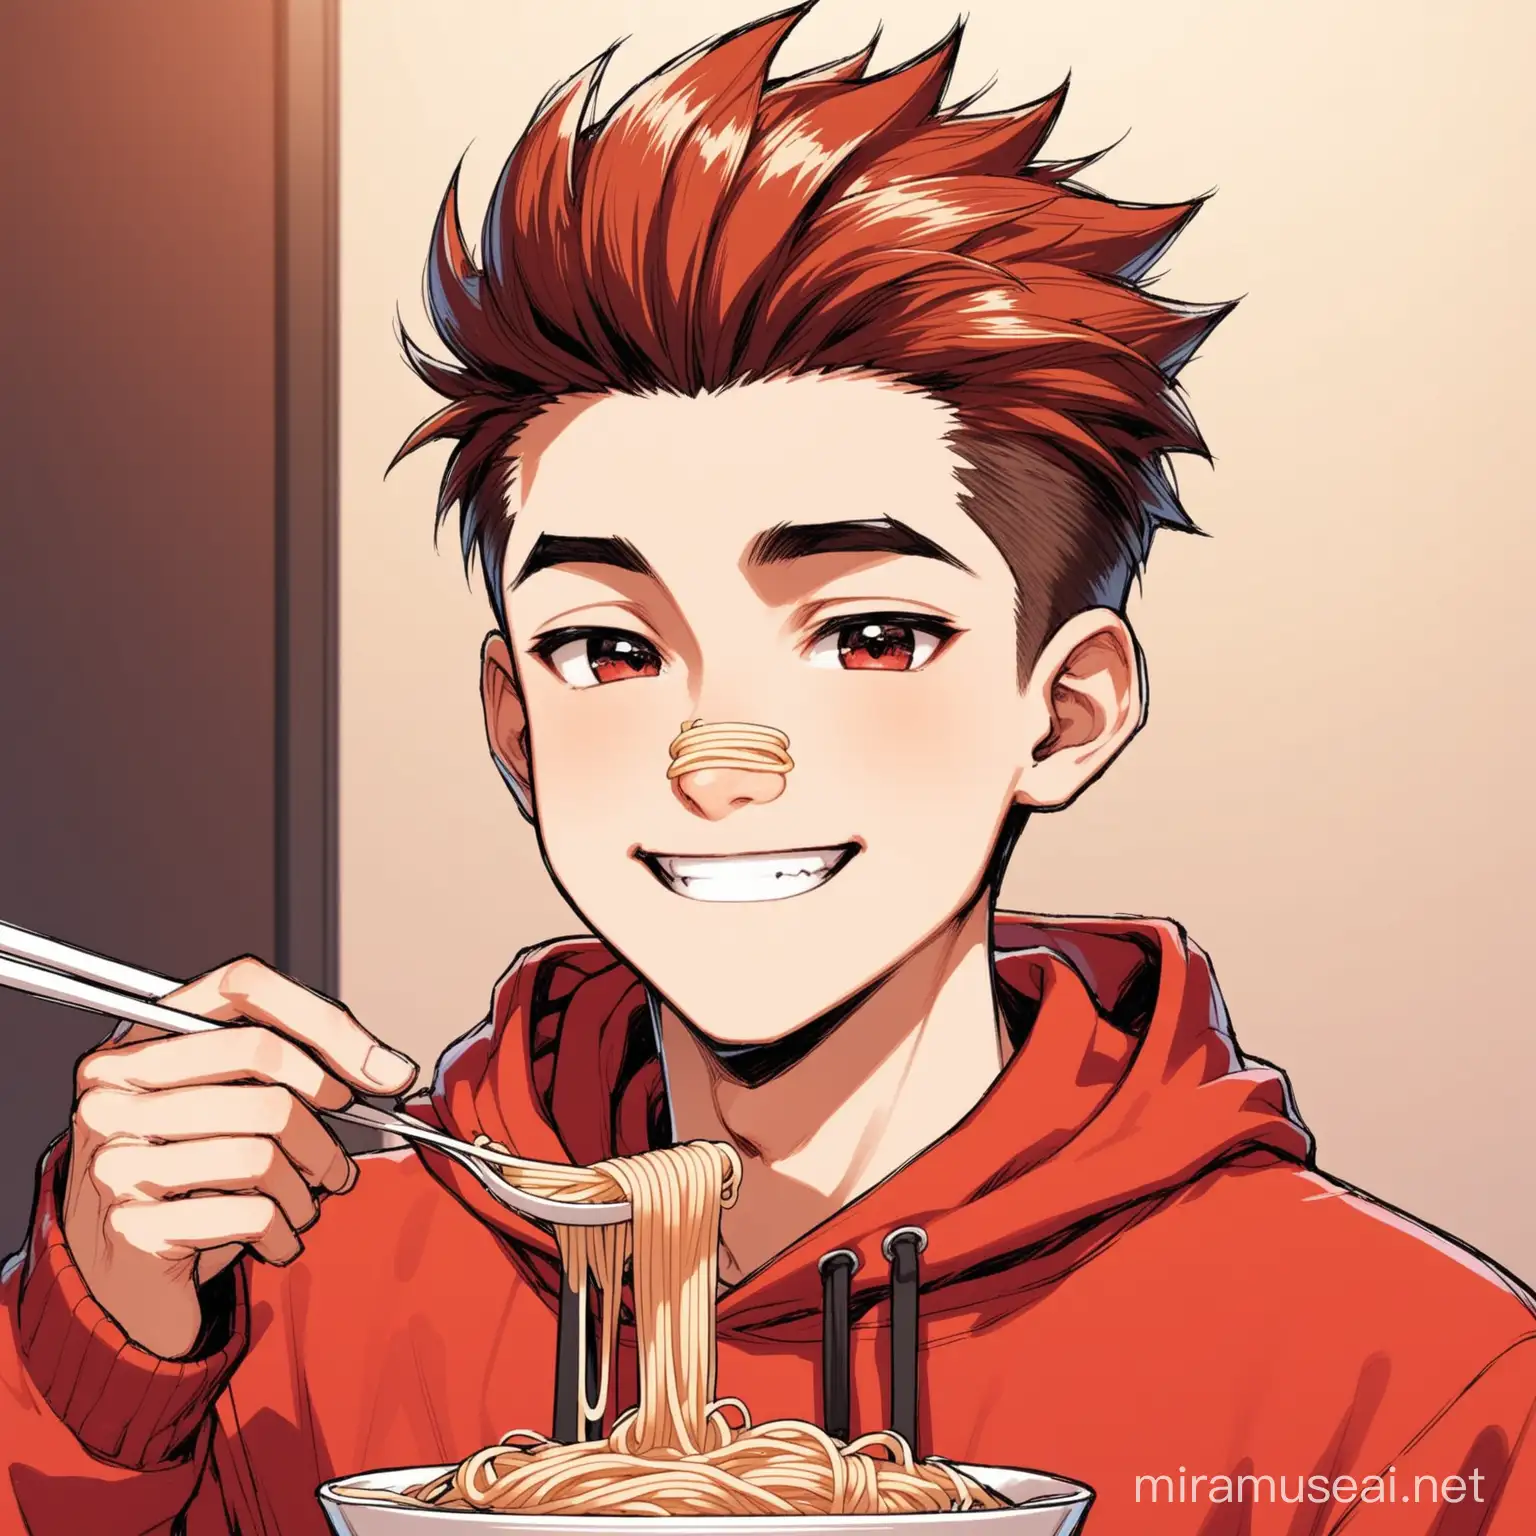 cool, hacker, red hoodie, quiff hairs, aesthetic, , big nose, small mouth, handsome, oblong face shape,cute
smile, eating noodles